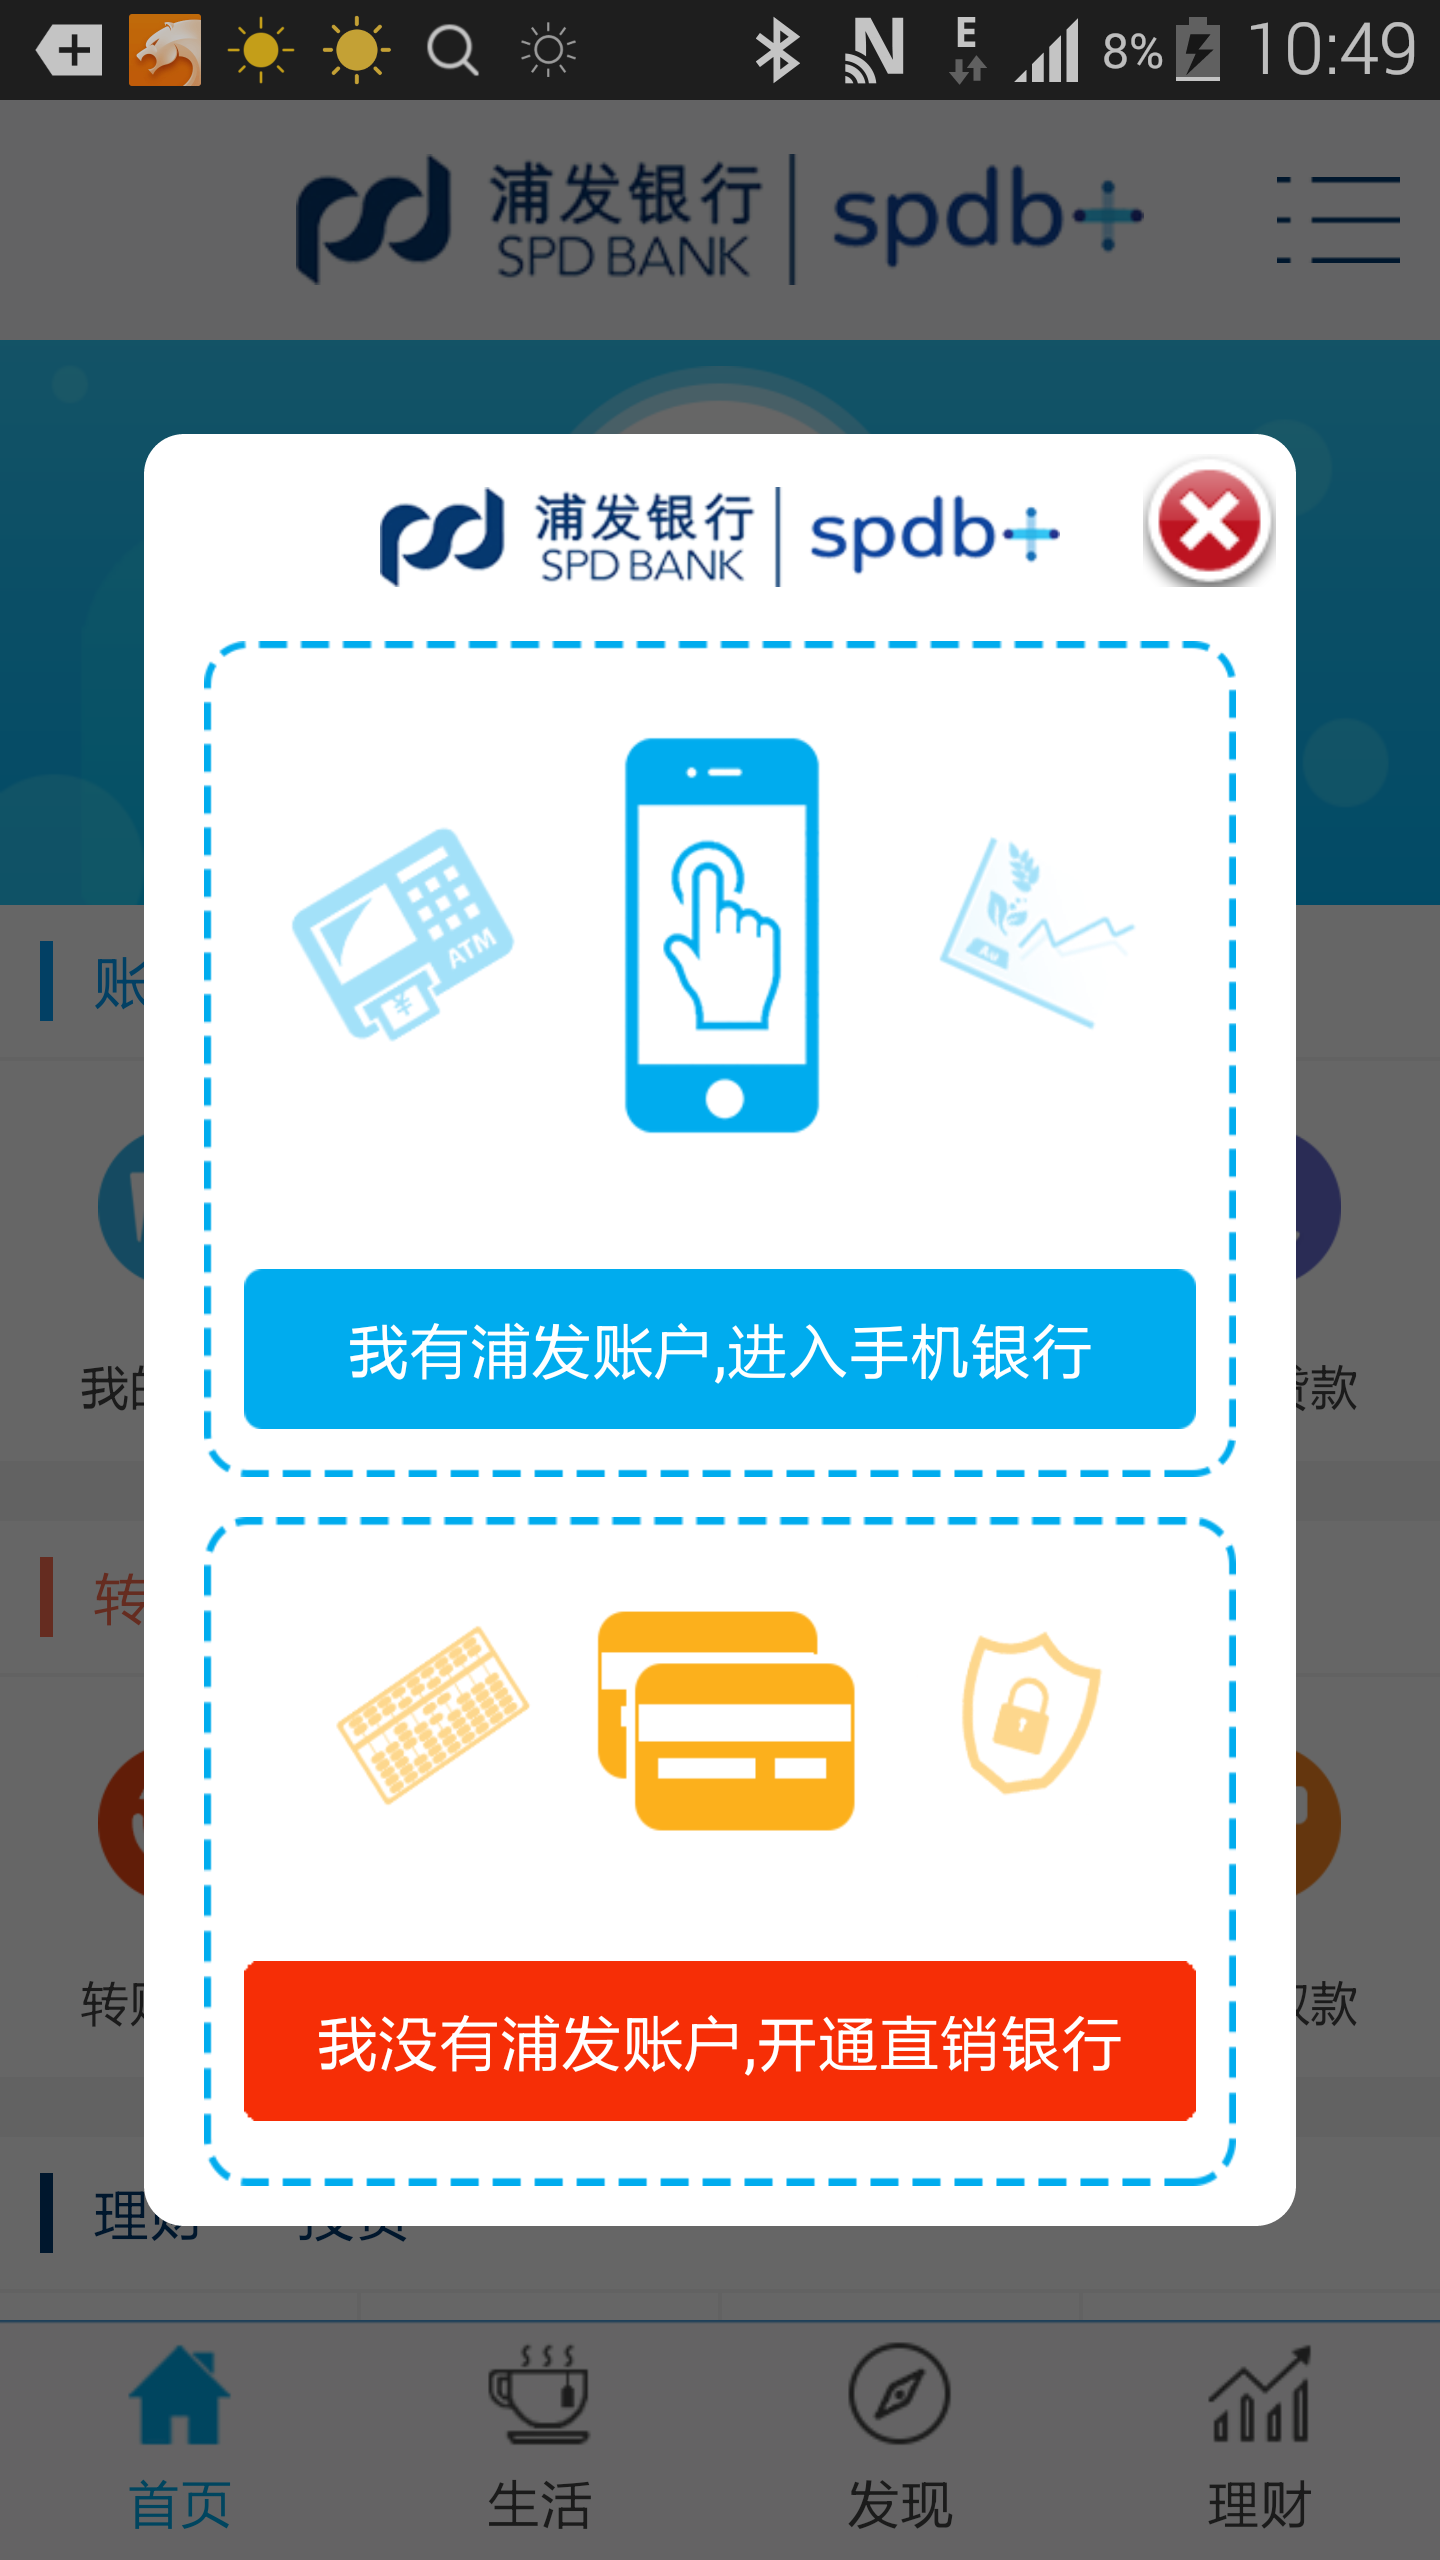 Android application 浦发手机银行 screenshort